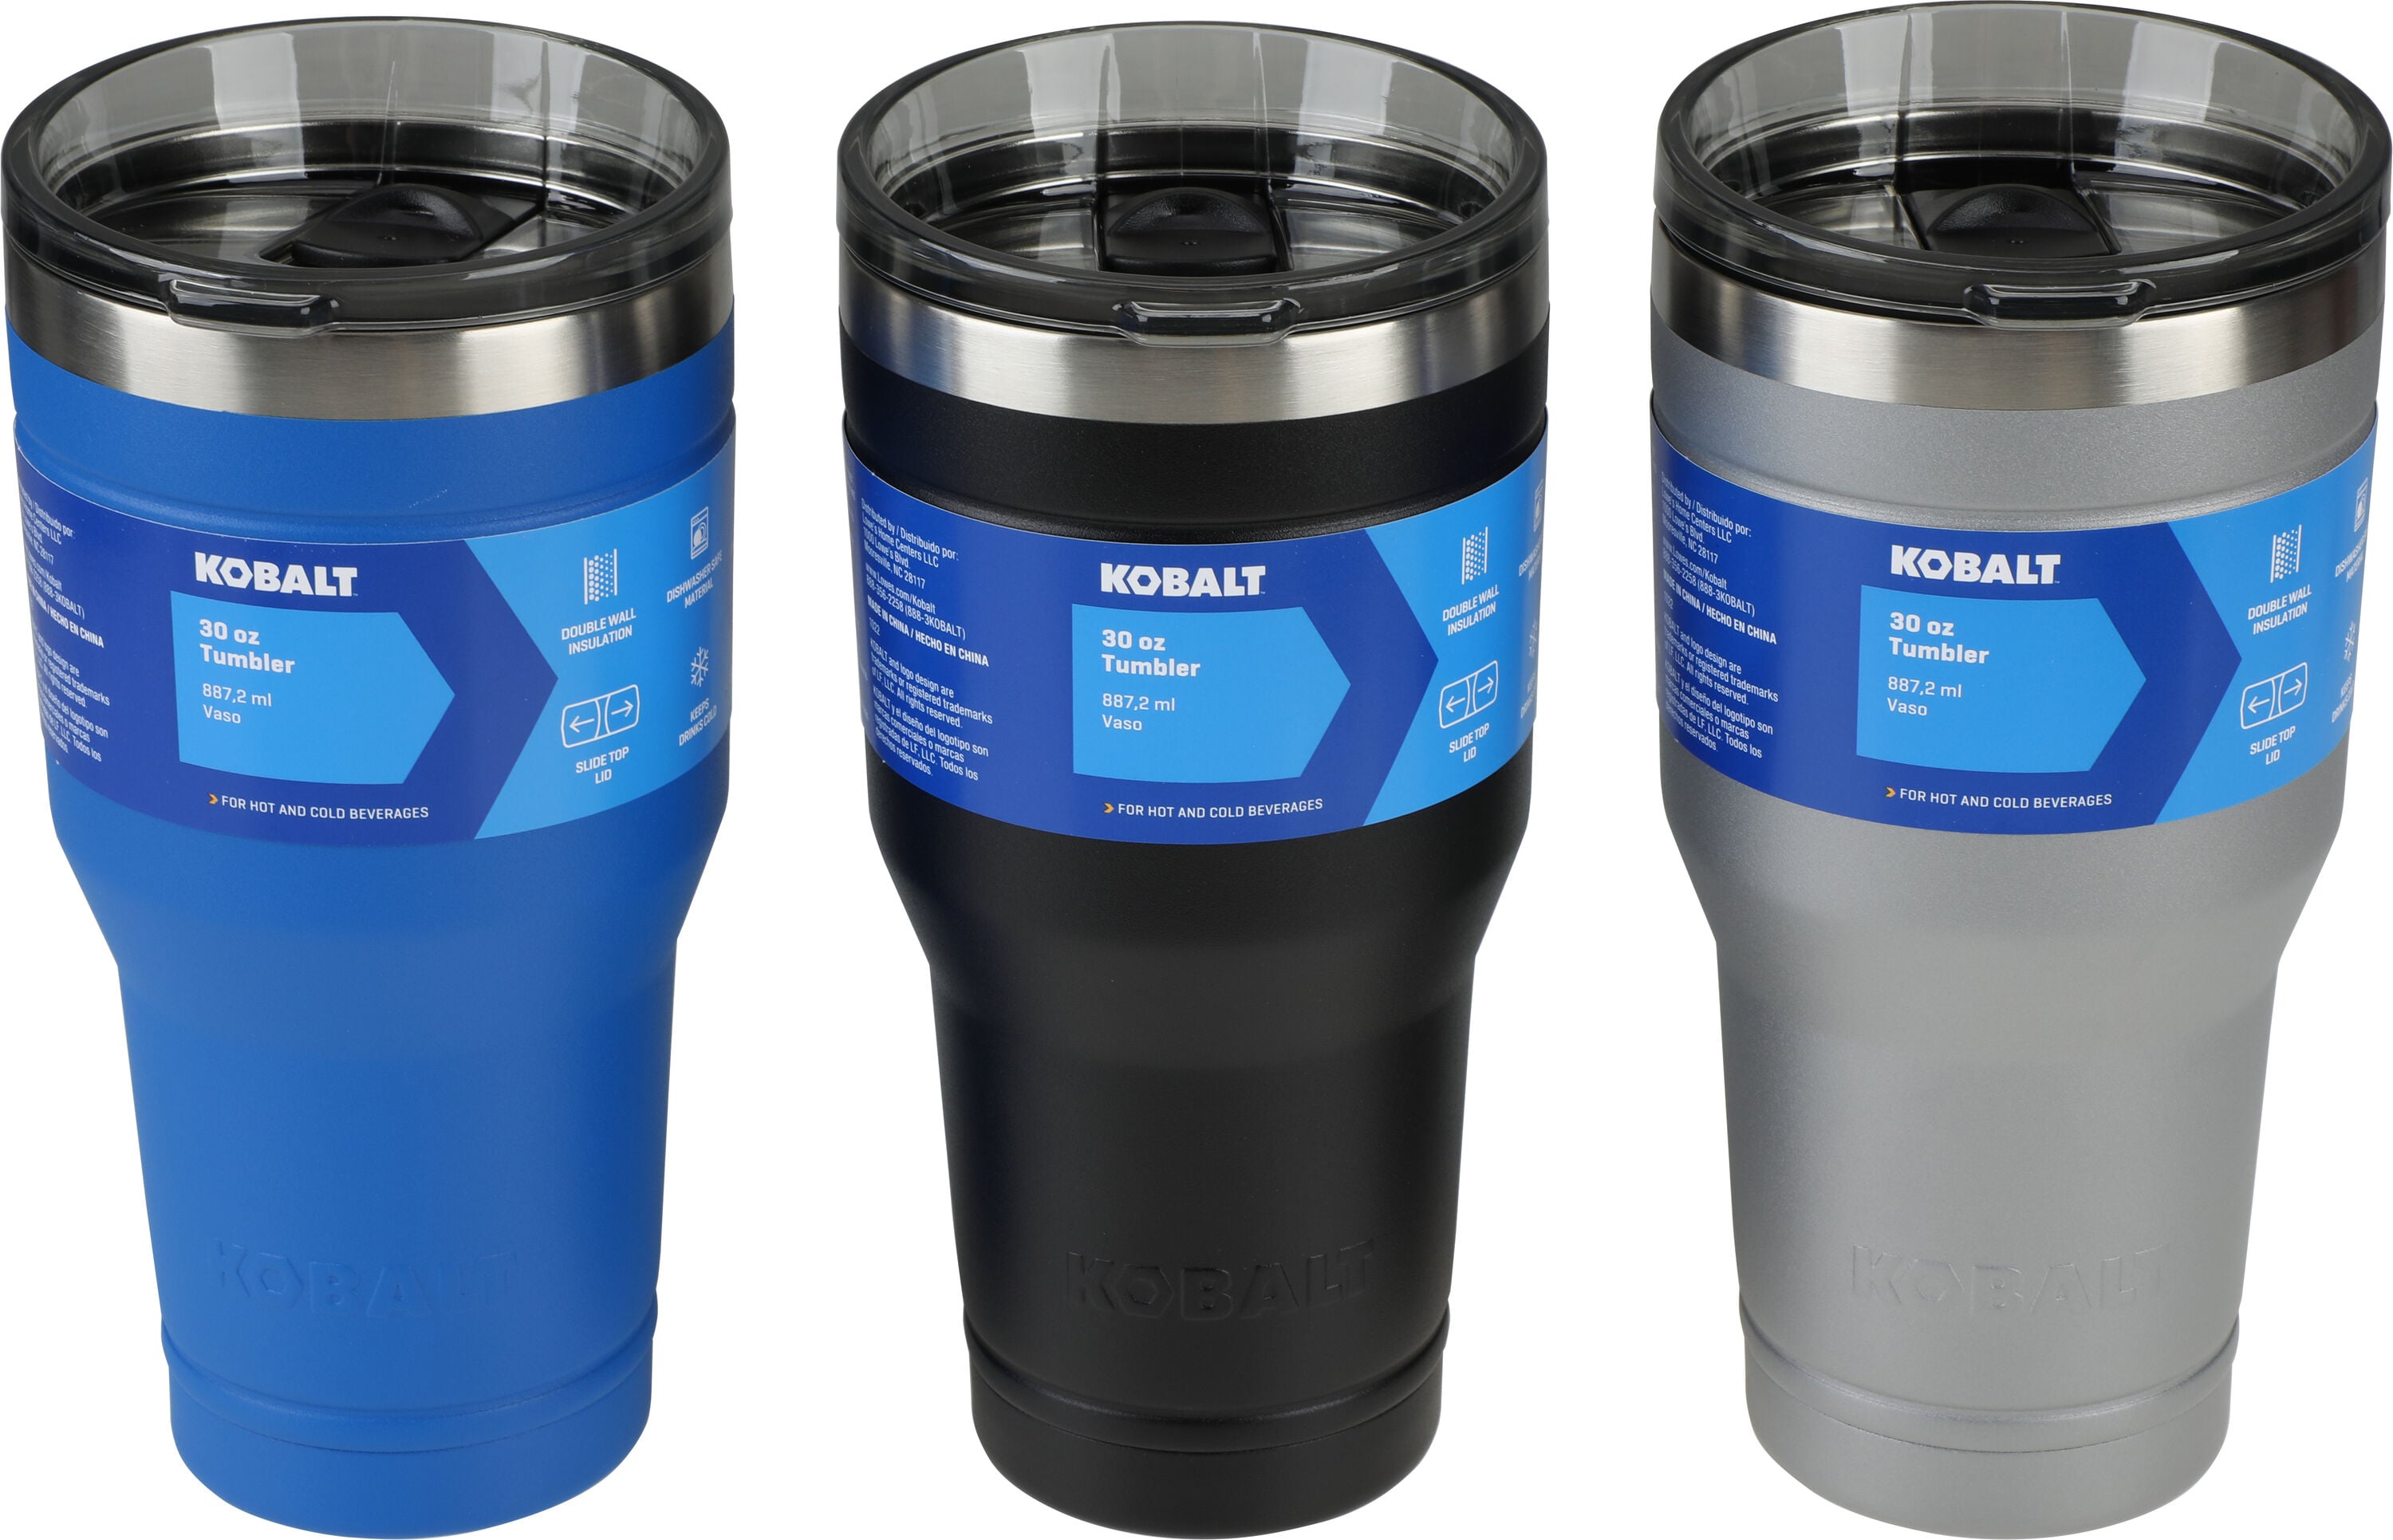 Stainless-Steel Tumblers Keep Drinks Cold (or Hot) - Food